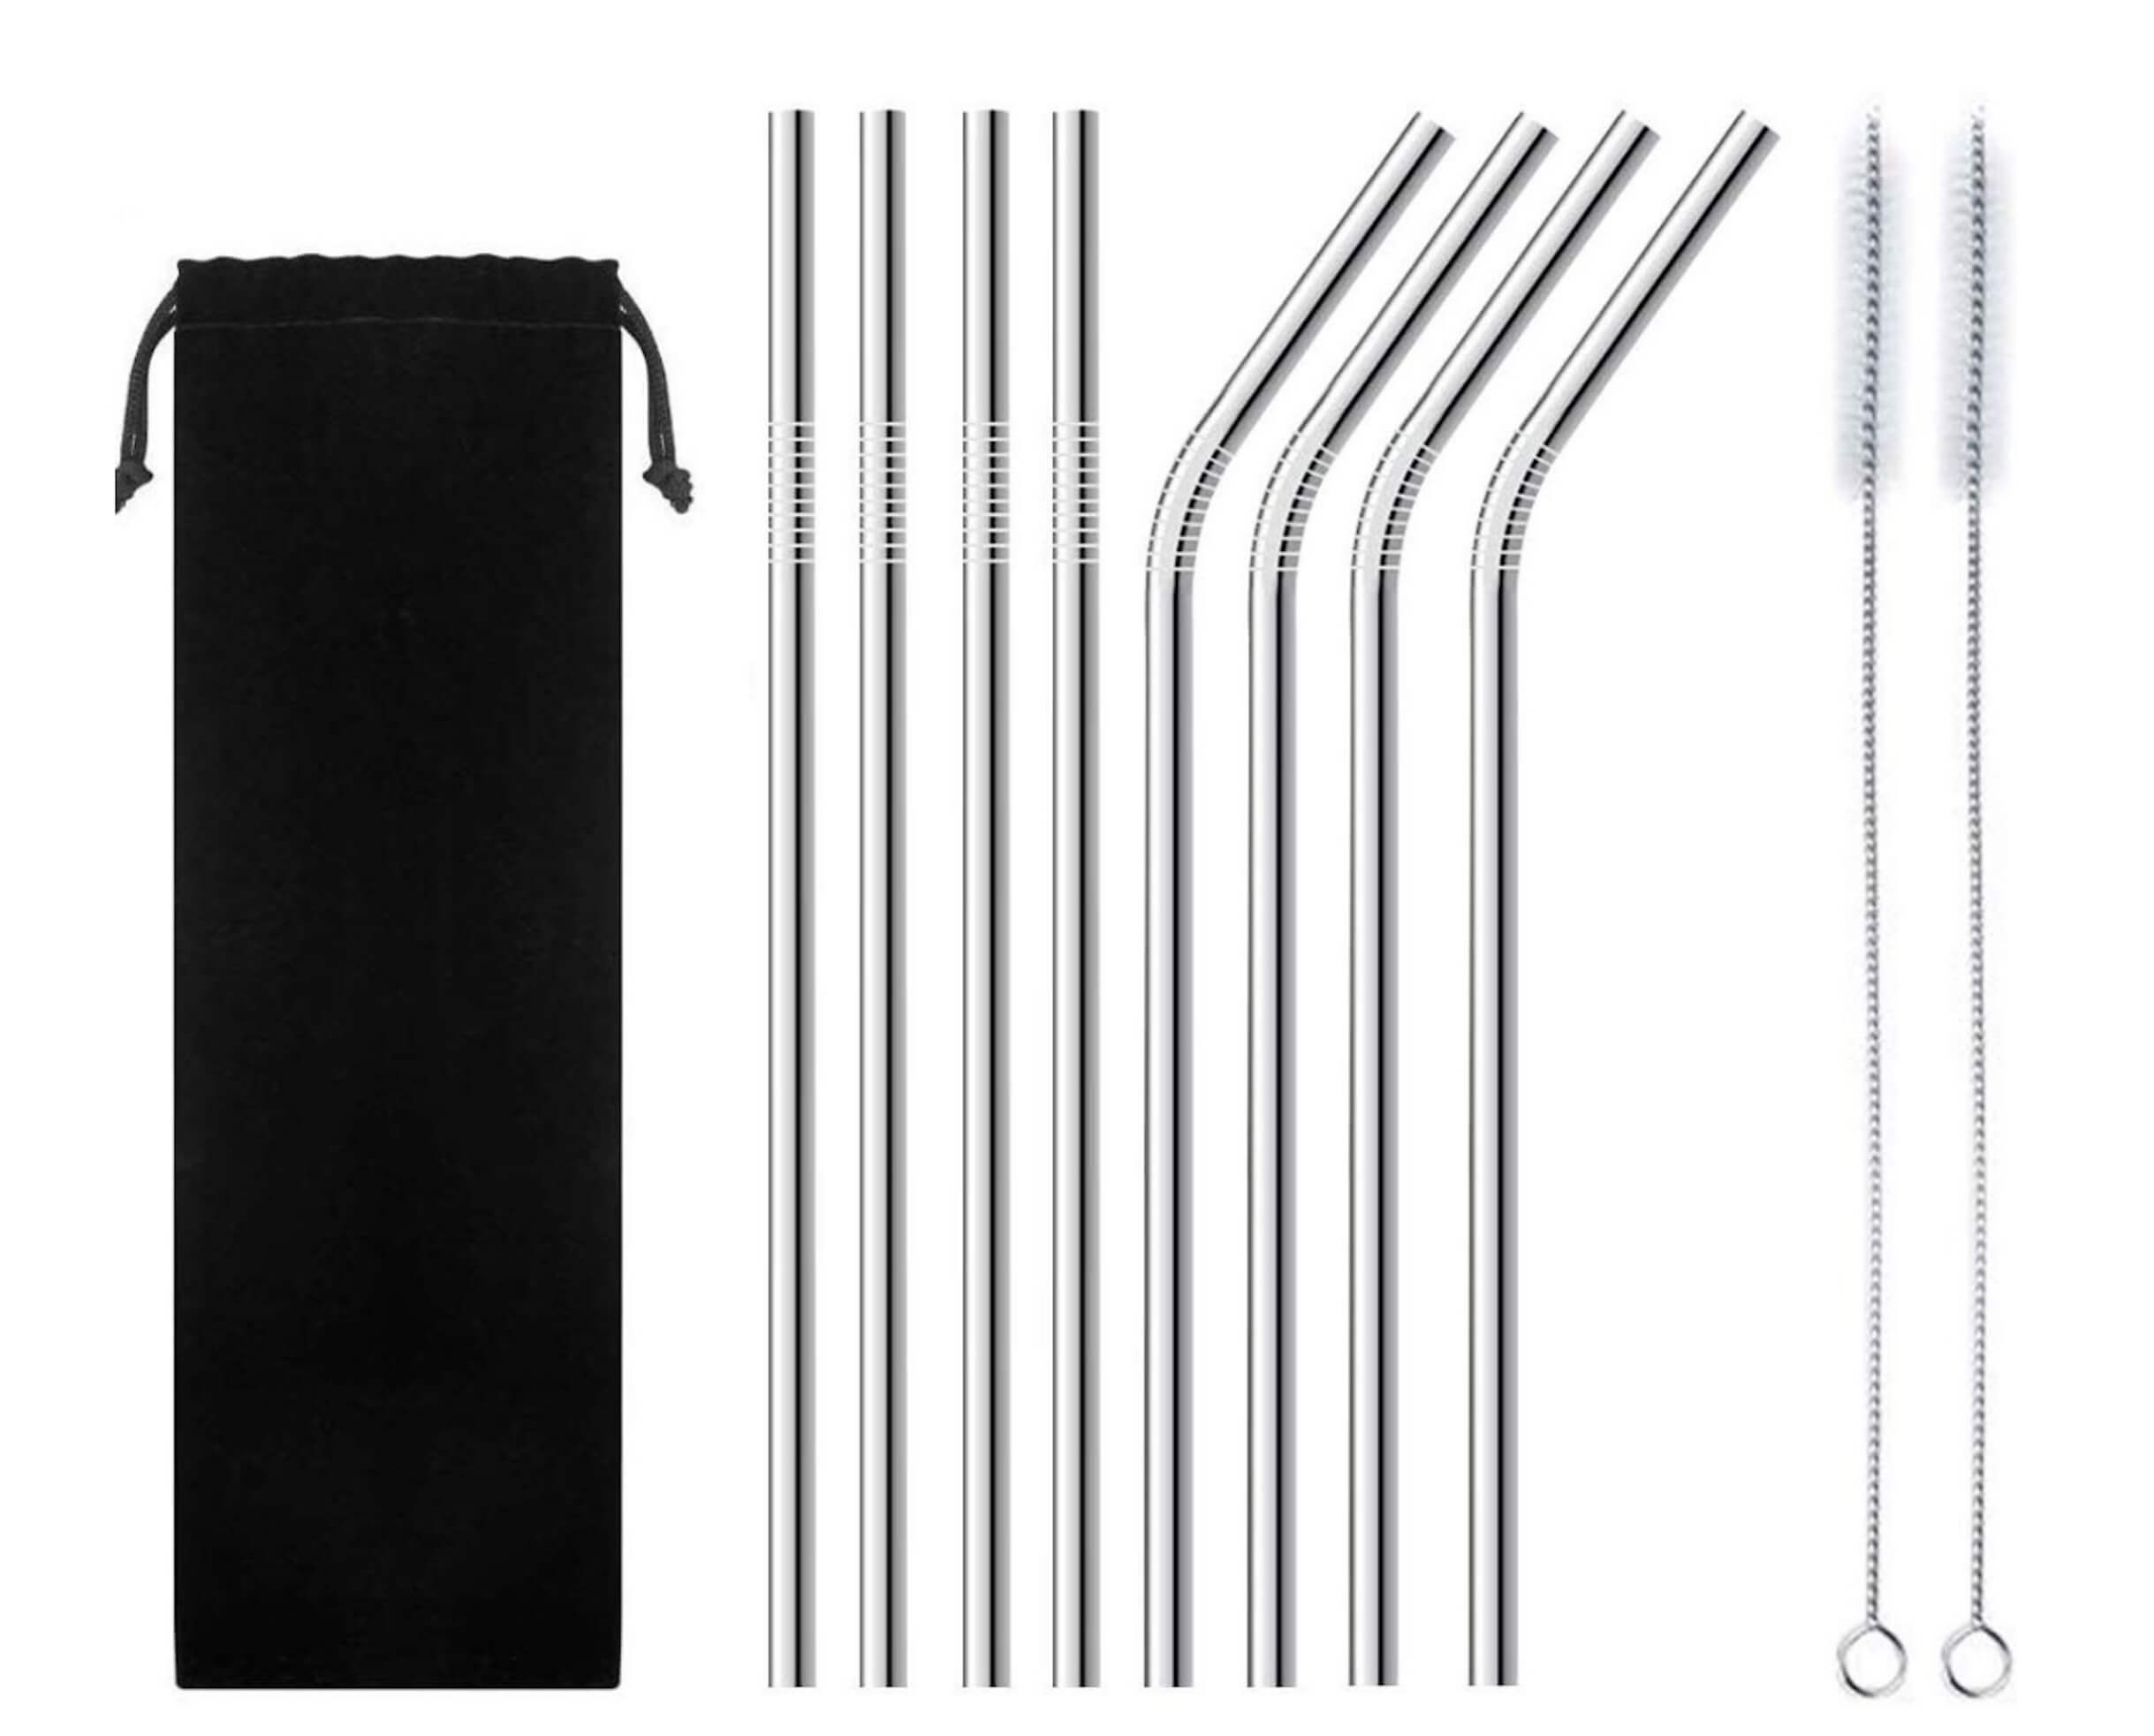 Softy Straws Premium Reusable Stainless Steel Drinking Straws with Silicone Tips + Patented Straw Cleaners and Carrying Case - 9 Long Metal with Curv